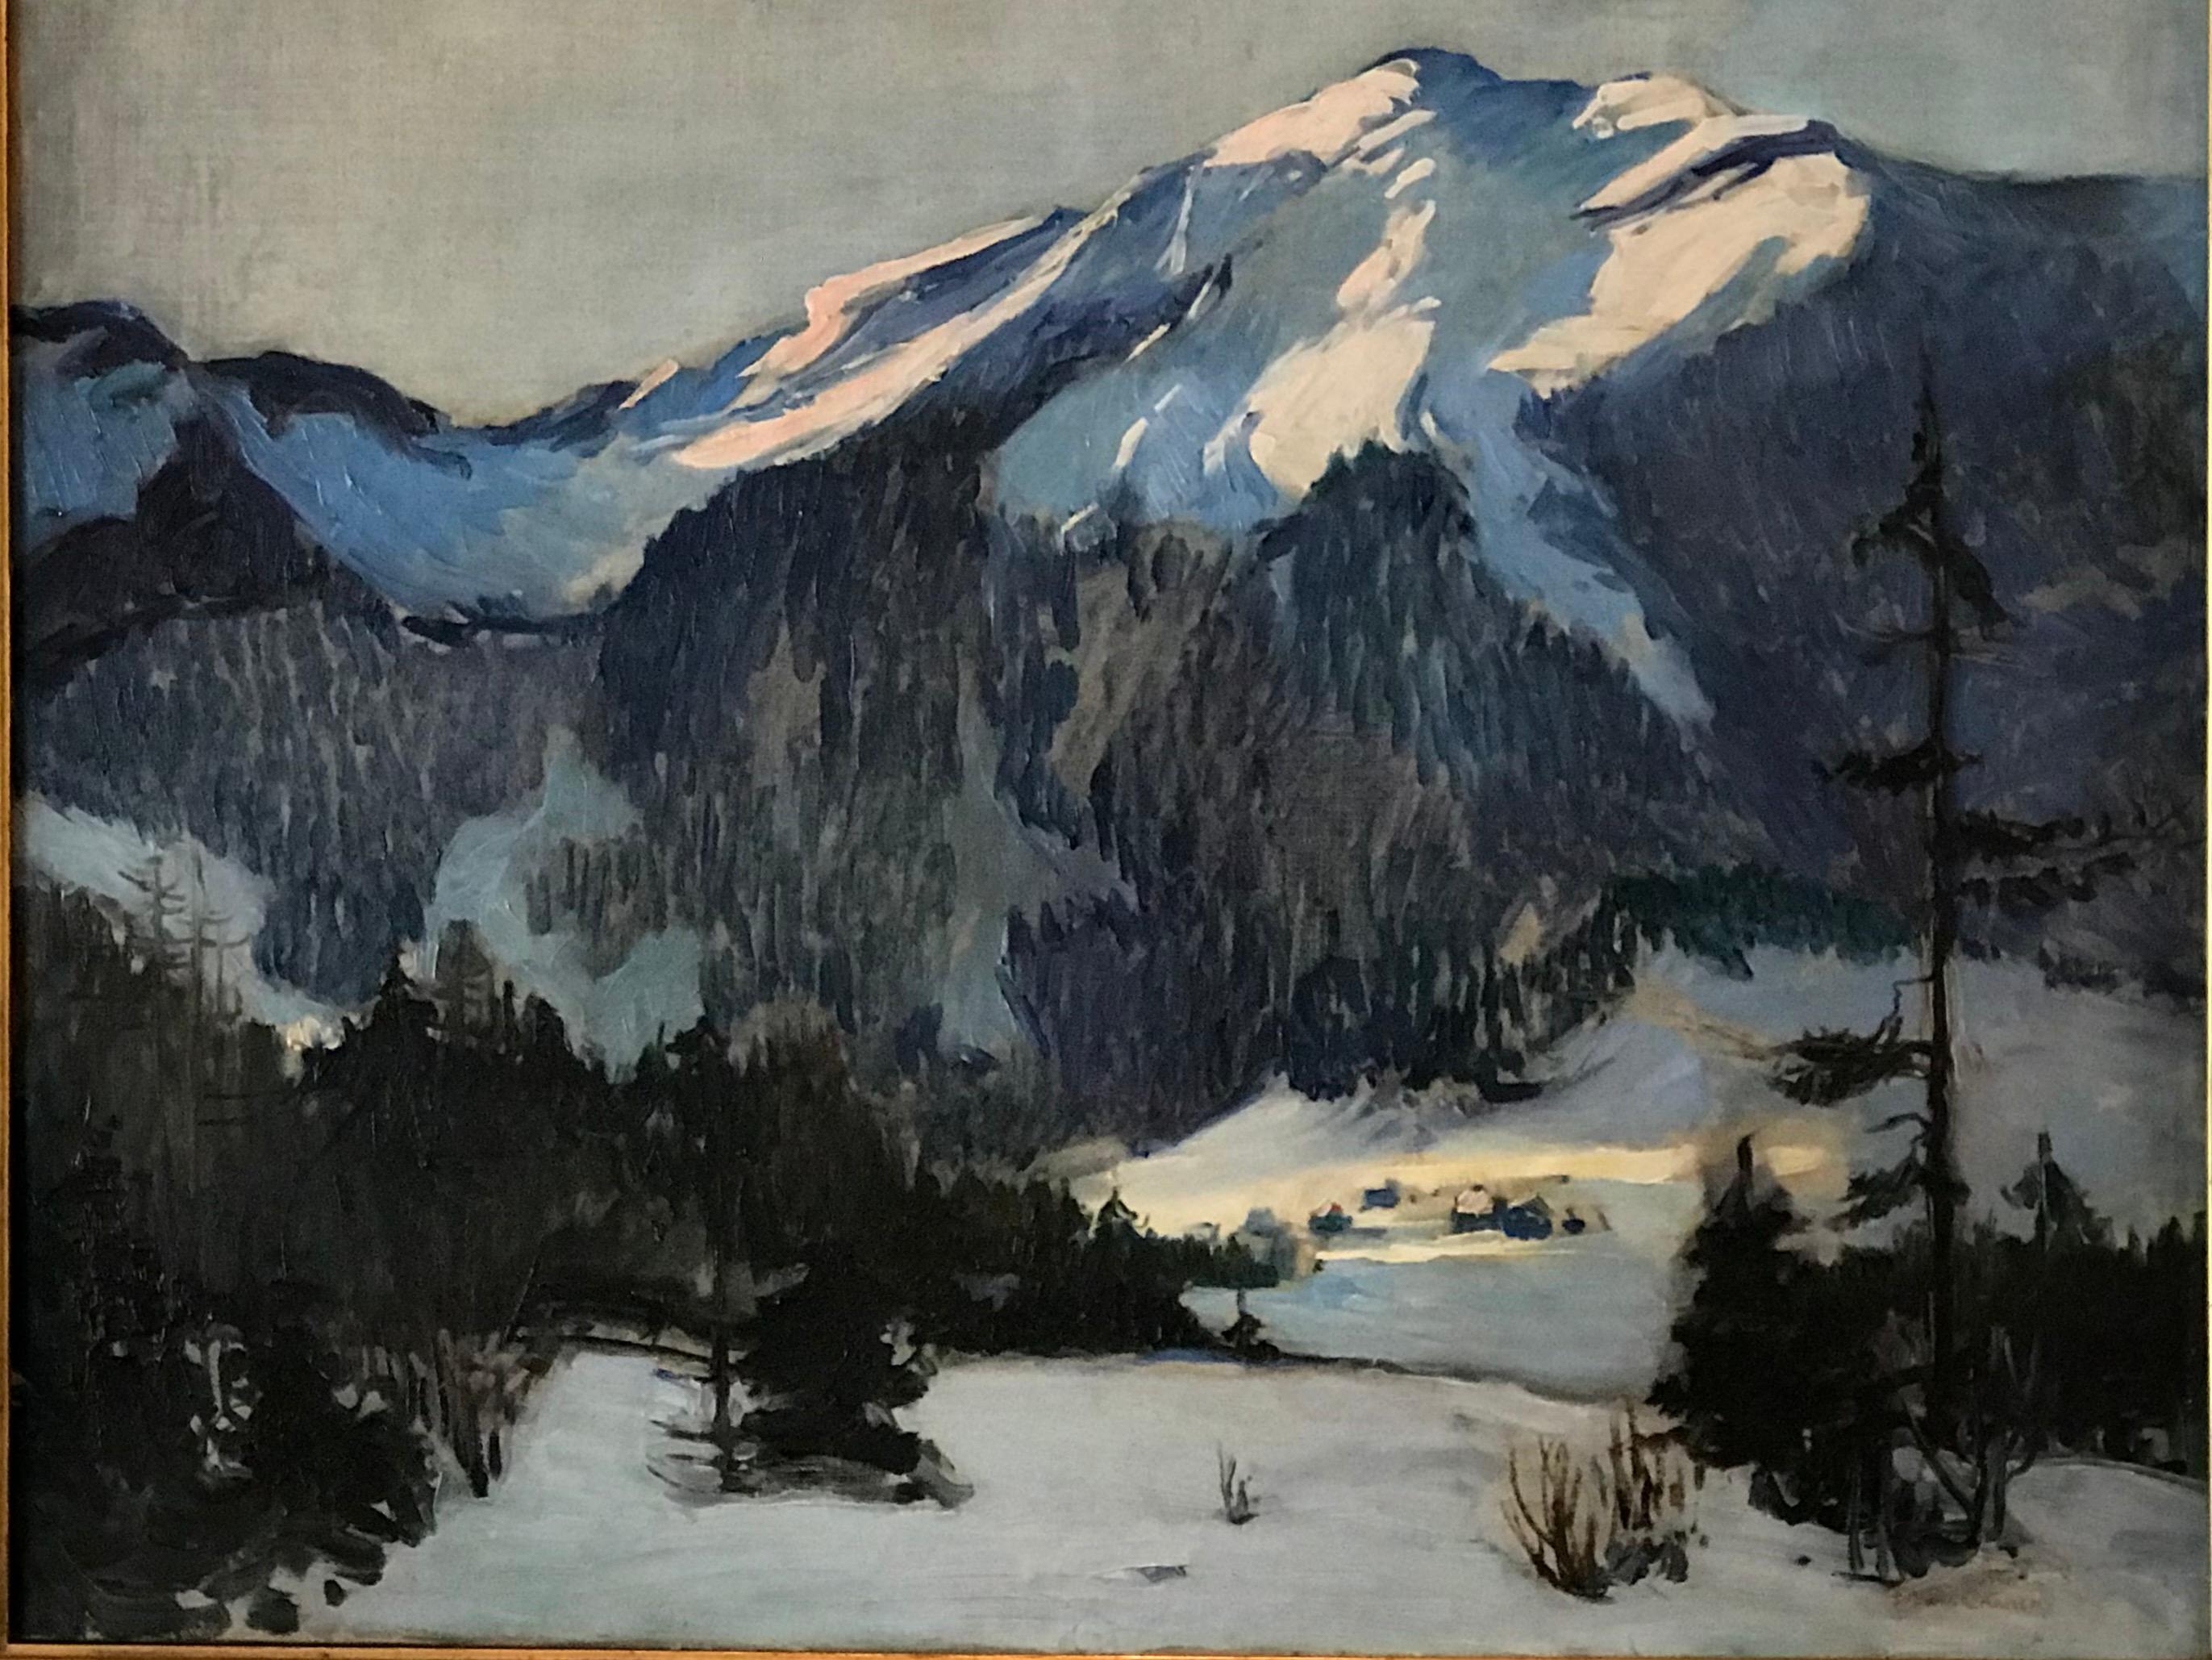 Florence Ballin Cramer (1884-1962) Woodstock, NY after 1922
Here, an oil on canvas of a winter scene with snow covered mountains, evergreen trees and a tiny settlement below the mountains. Monumental. Painting signed lower right and dated.